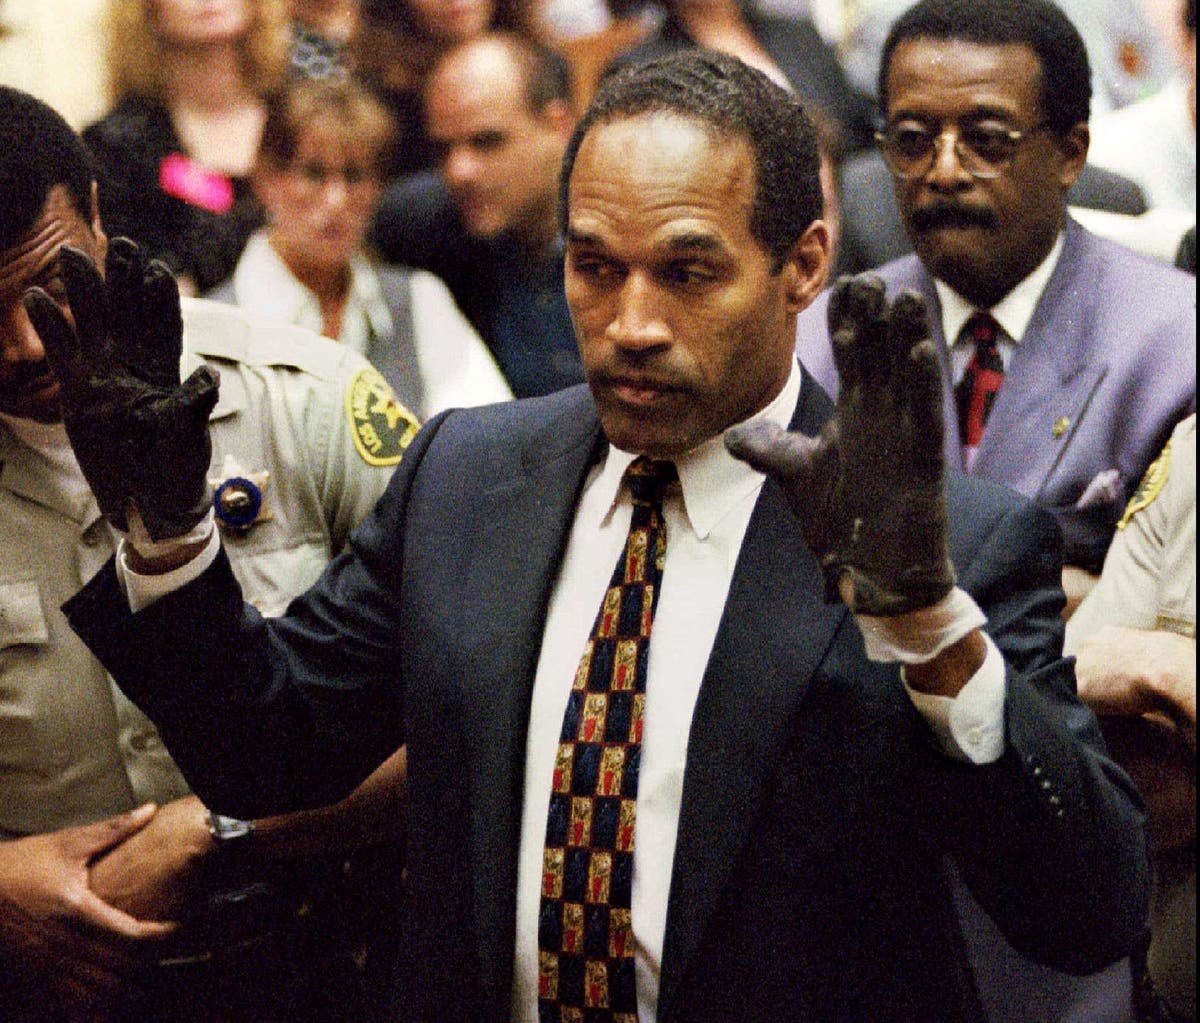 OJ Simpson dead latest: World remembers star athlete and notorious murder suspect [Video]